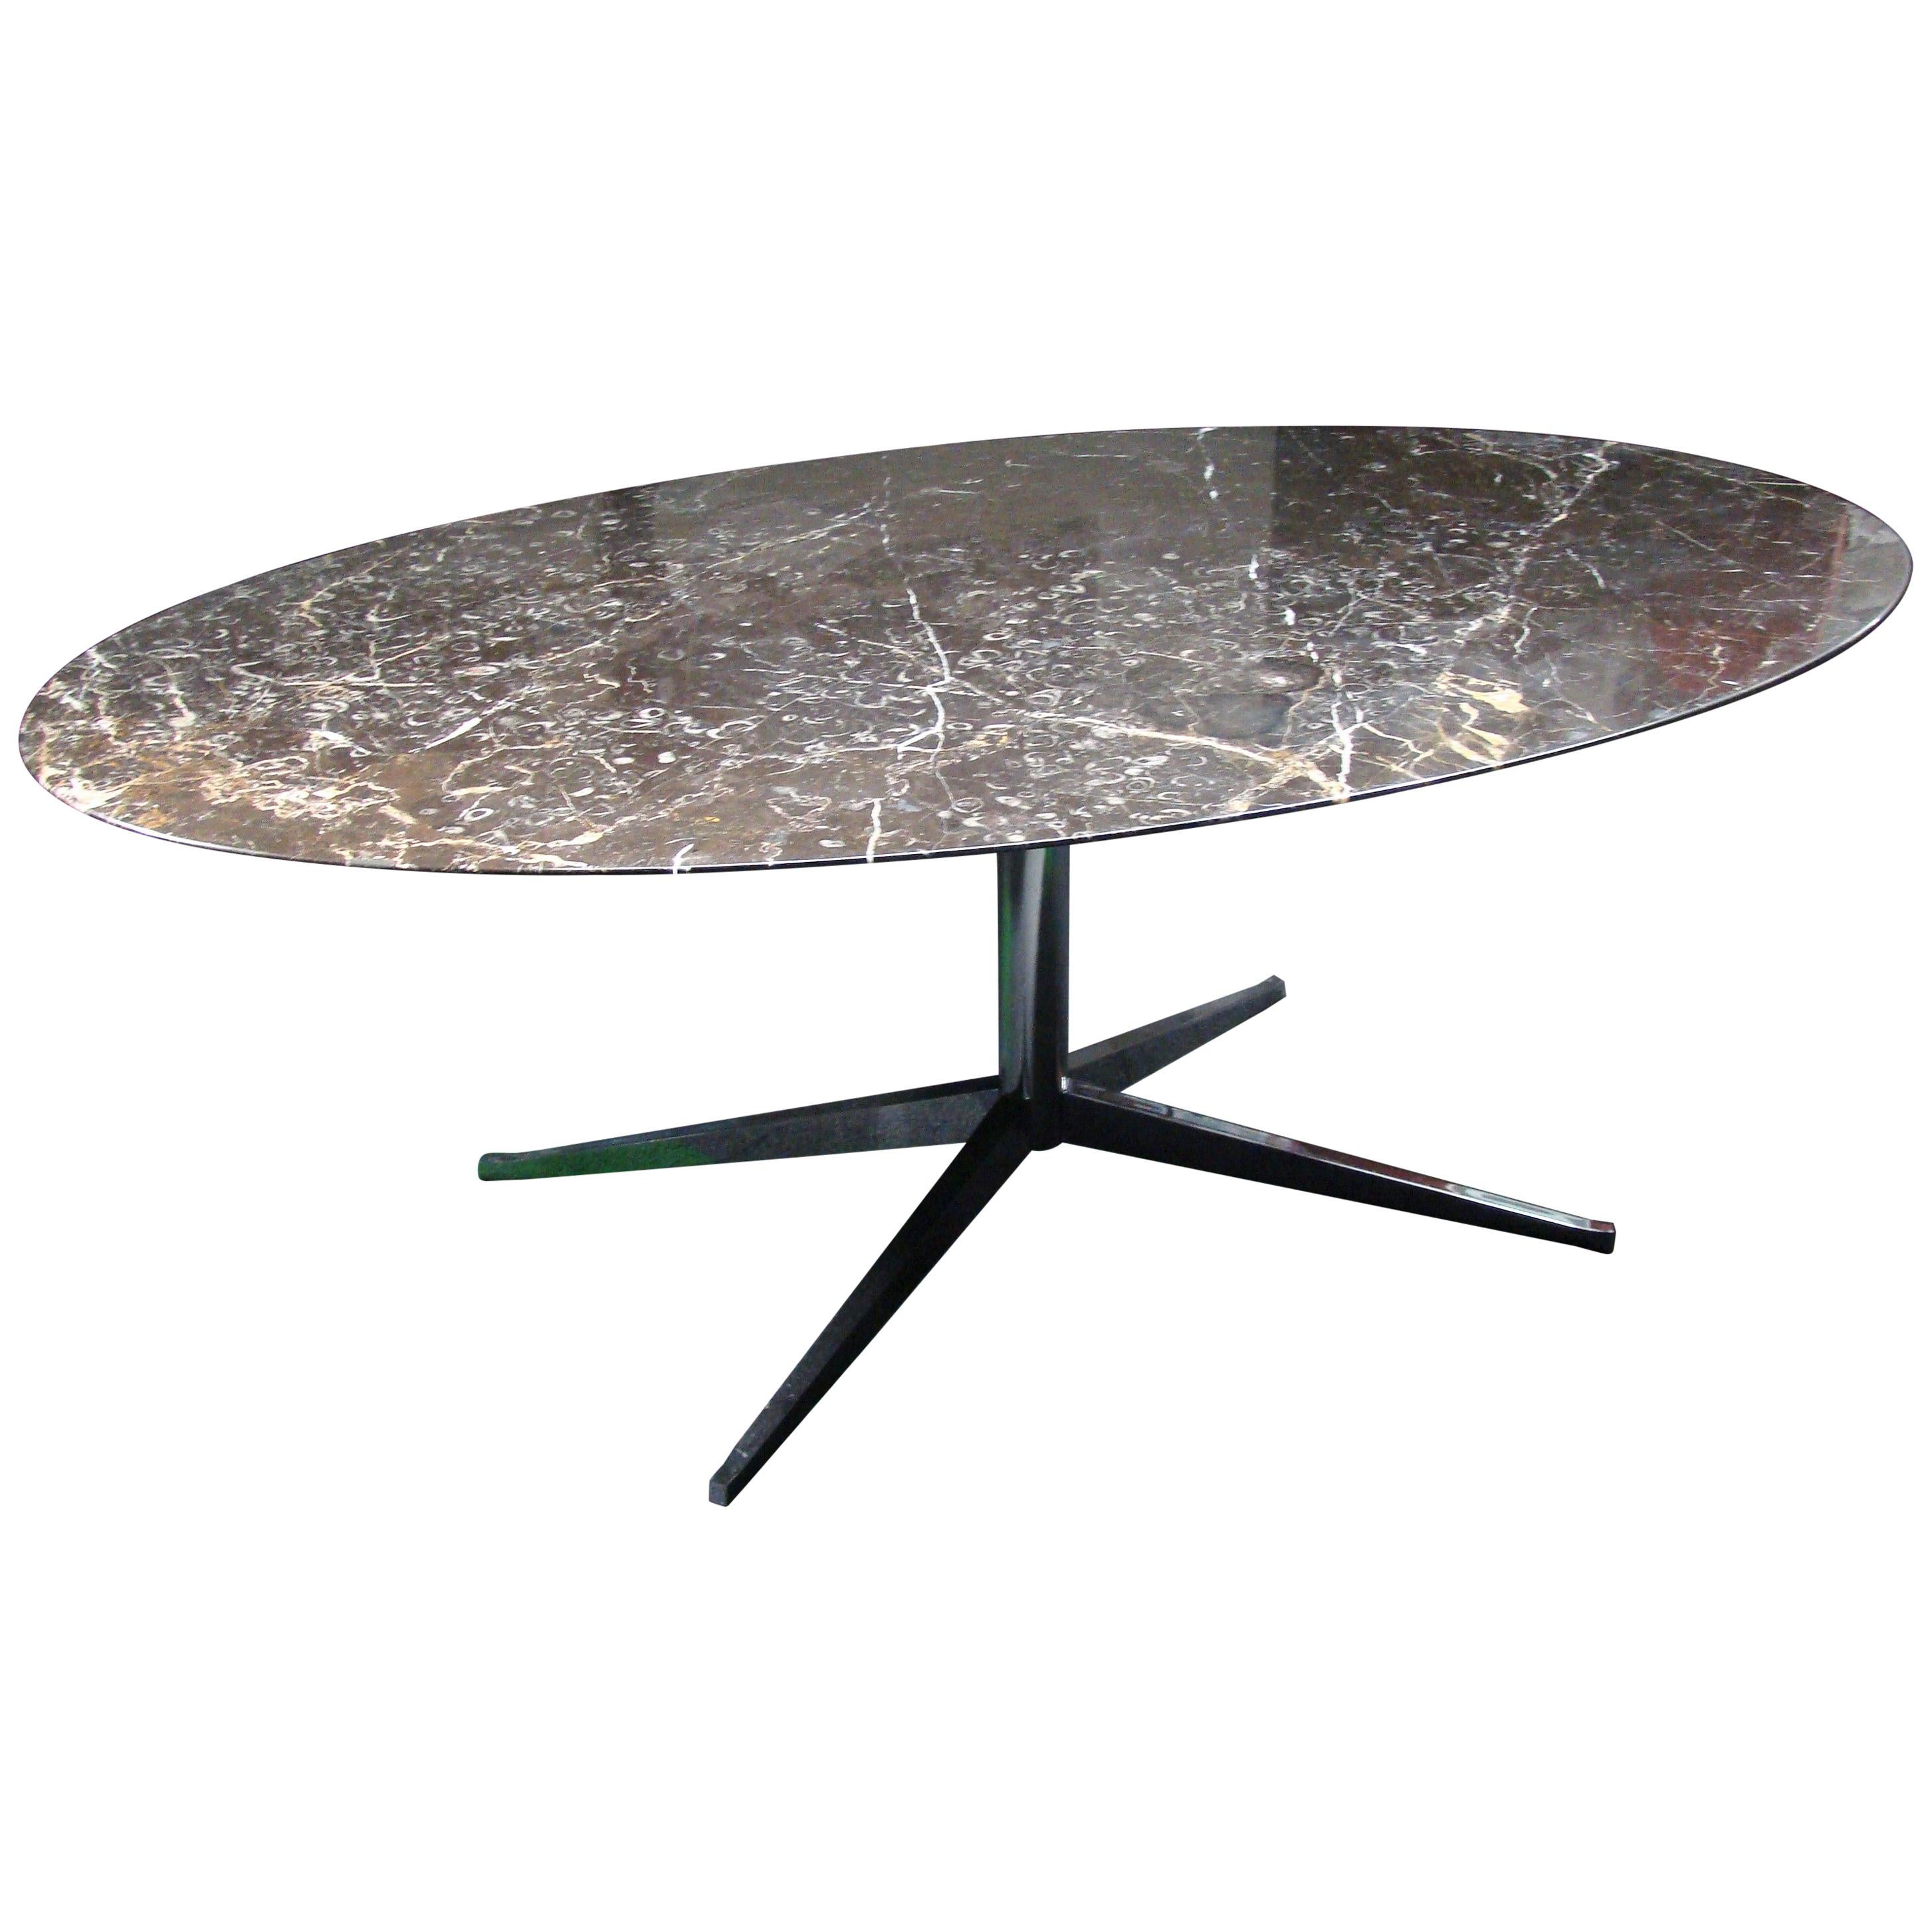 Oval Florence Knoll Table/Desk in Chrome with Black Malochite Marble, circa 1972